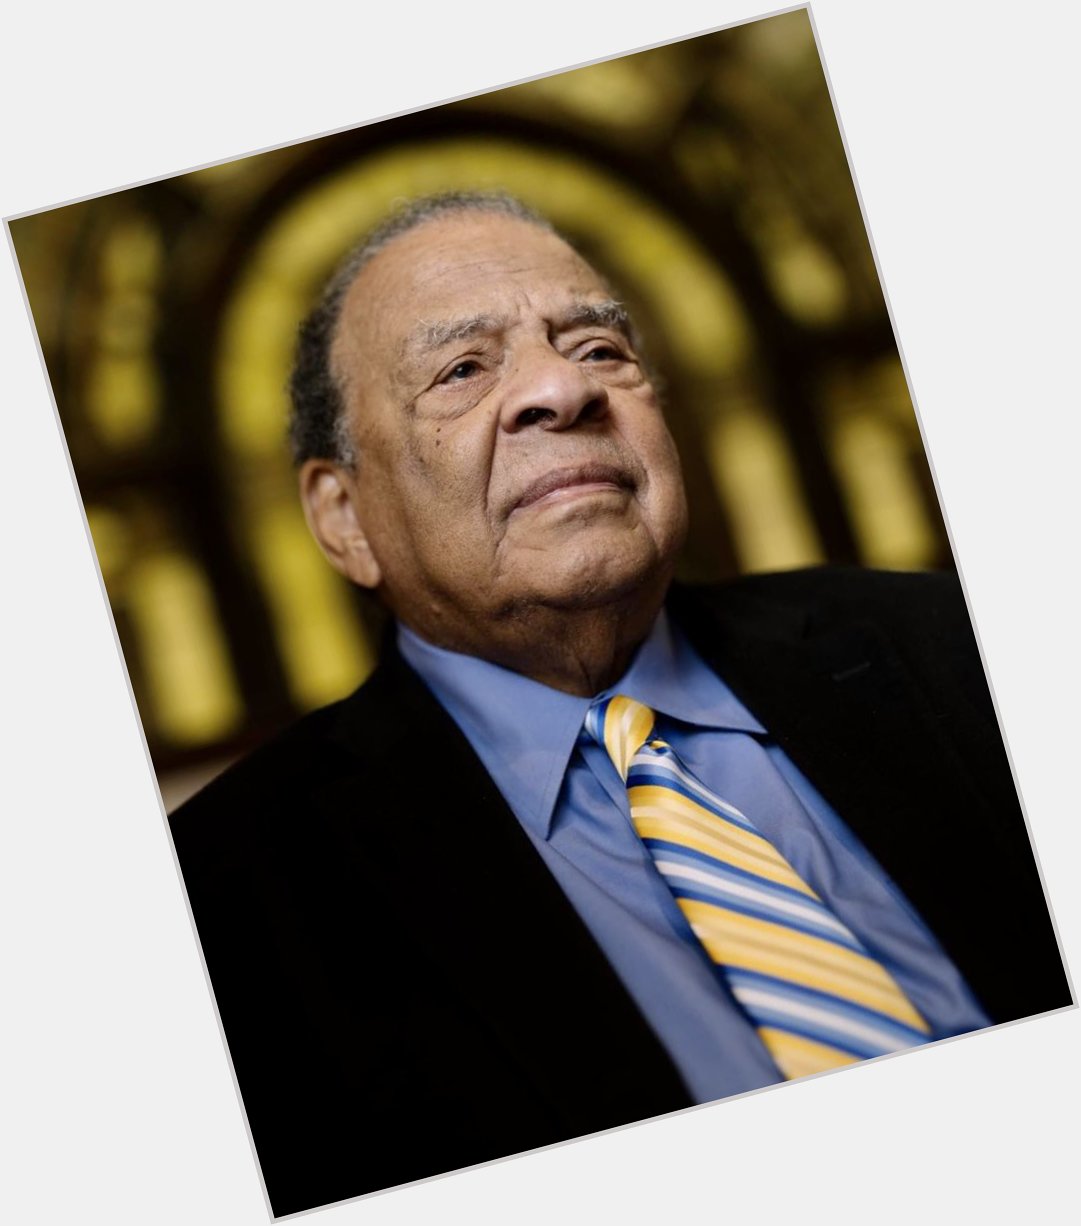 Andrew Young March 12, 1932
*HAPPY BIRTHDAY* 